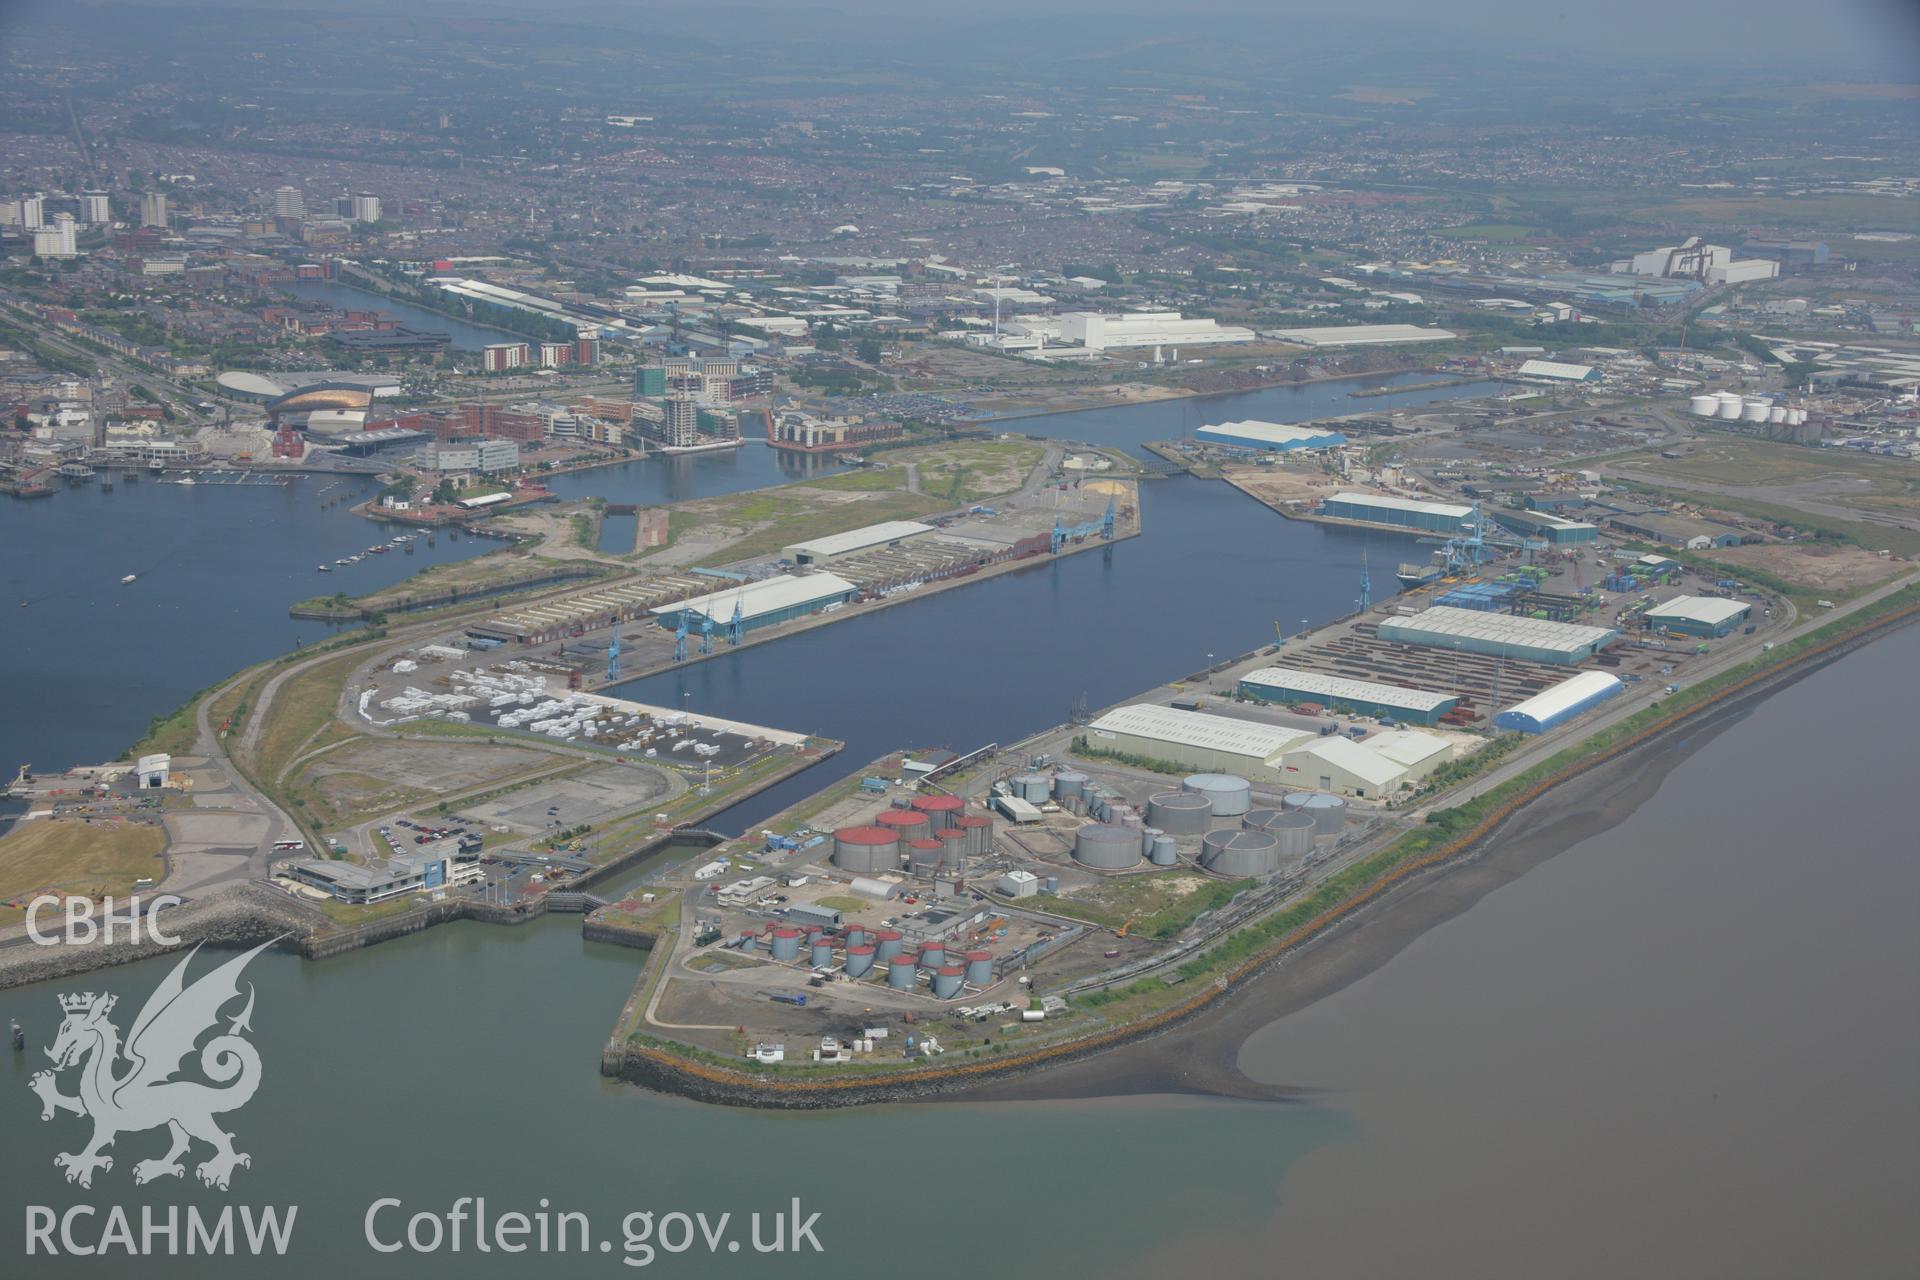 RCAHMW colour oblique photograph of Cardiff Bay, Queen Alexandra Dock. Taken by Toby Driver on 29/06/2006.